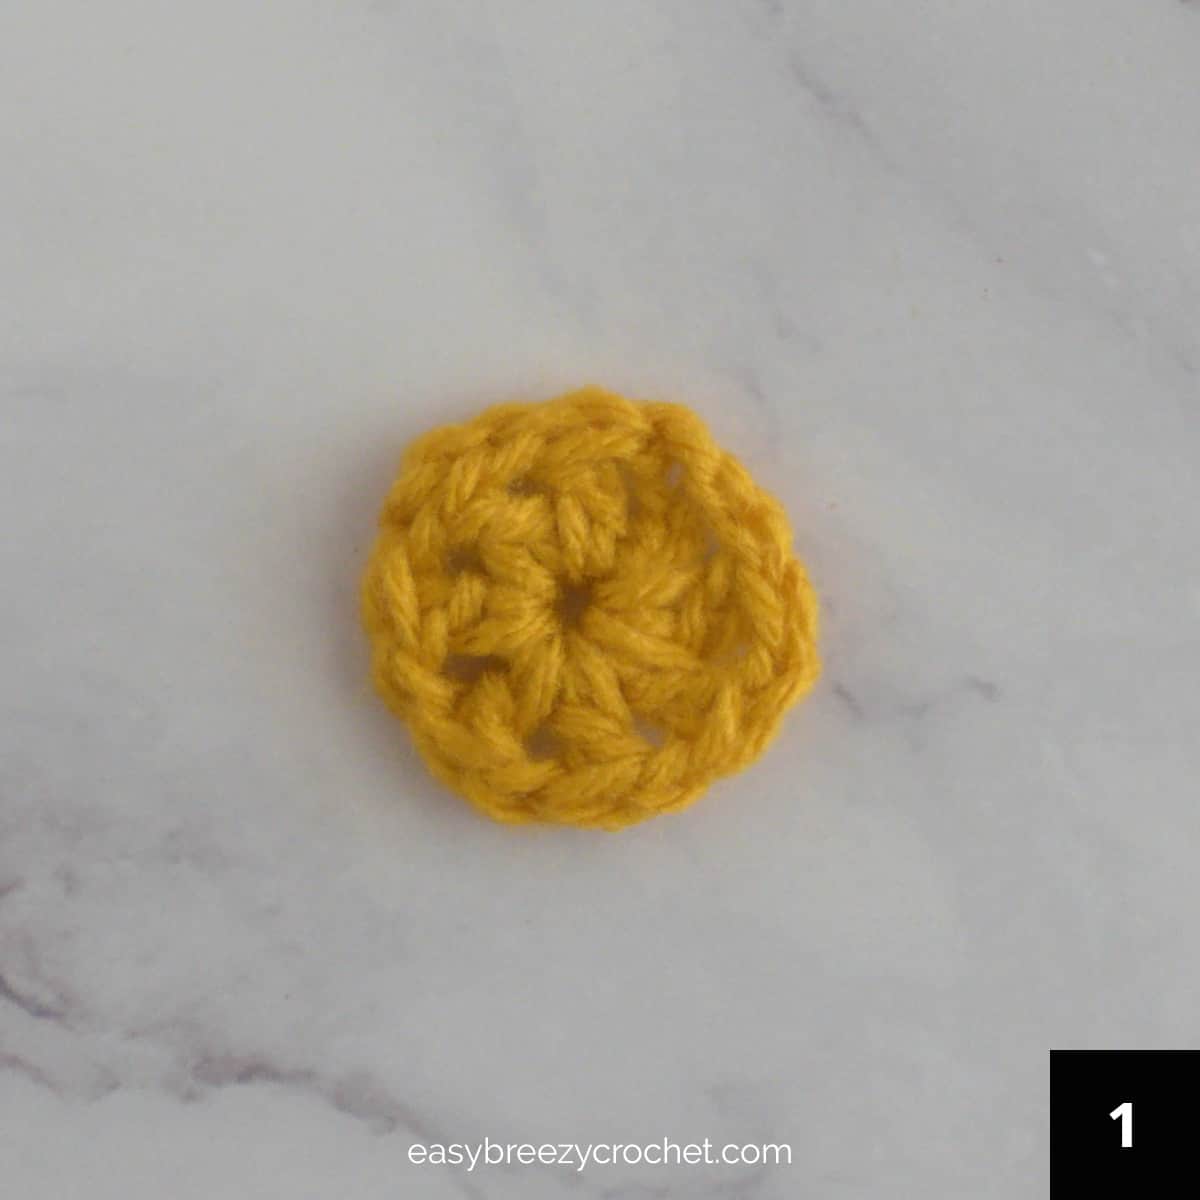 A gold colored single round crochet circle.